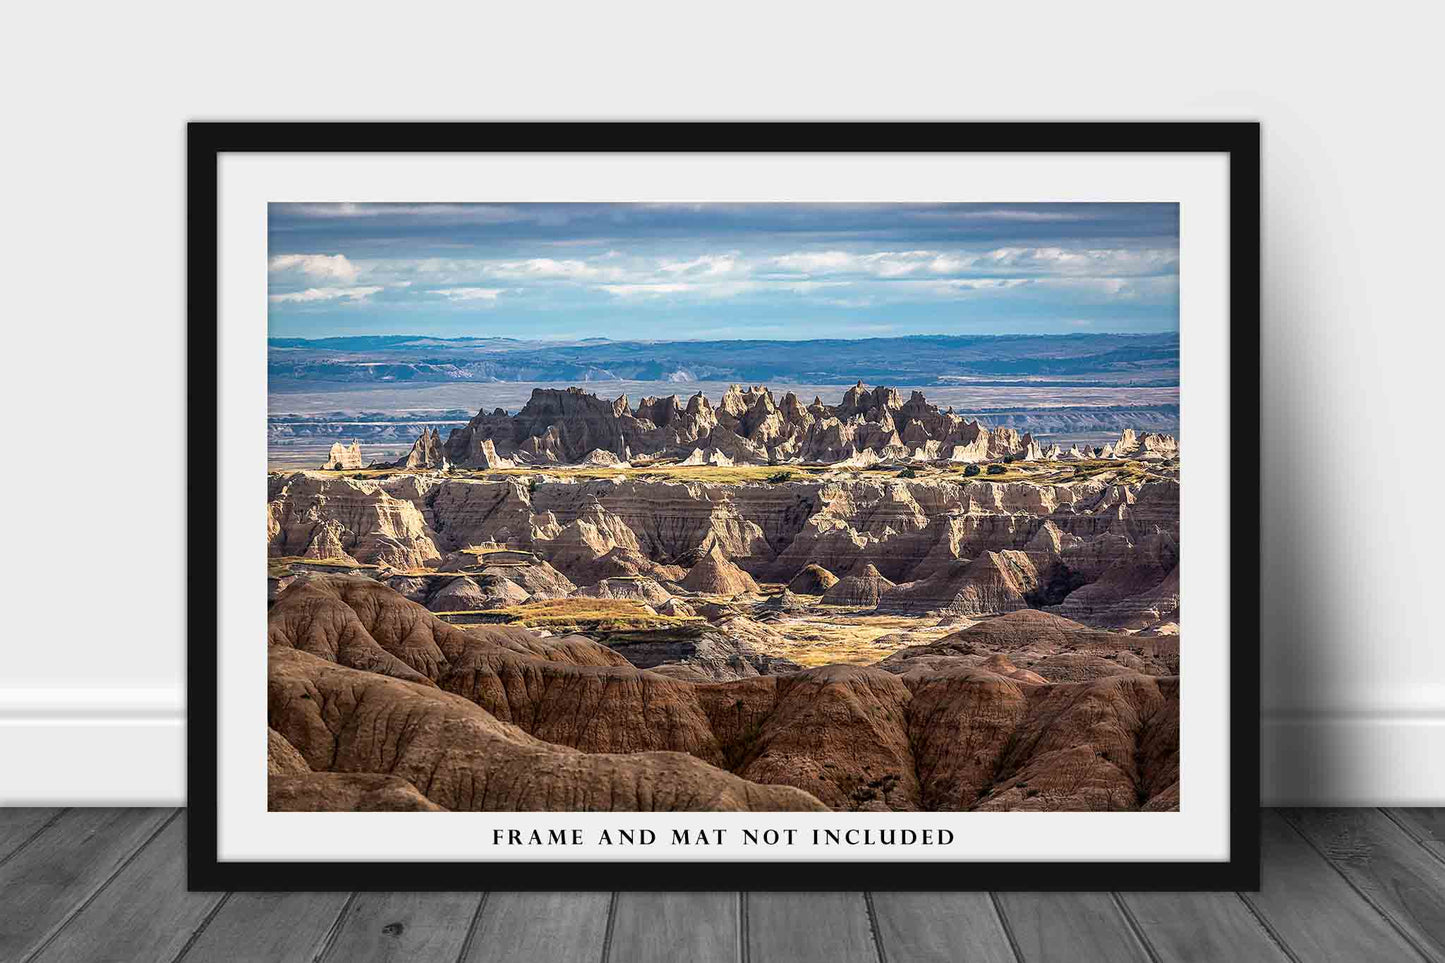 Landscape Photography Print - Wall Art Picture of Spires in South Dakota Badlands on Autumn Day Great Plains Photo Decor 5x7 to 40x60